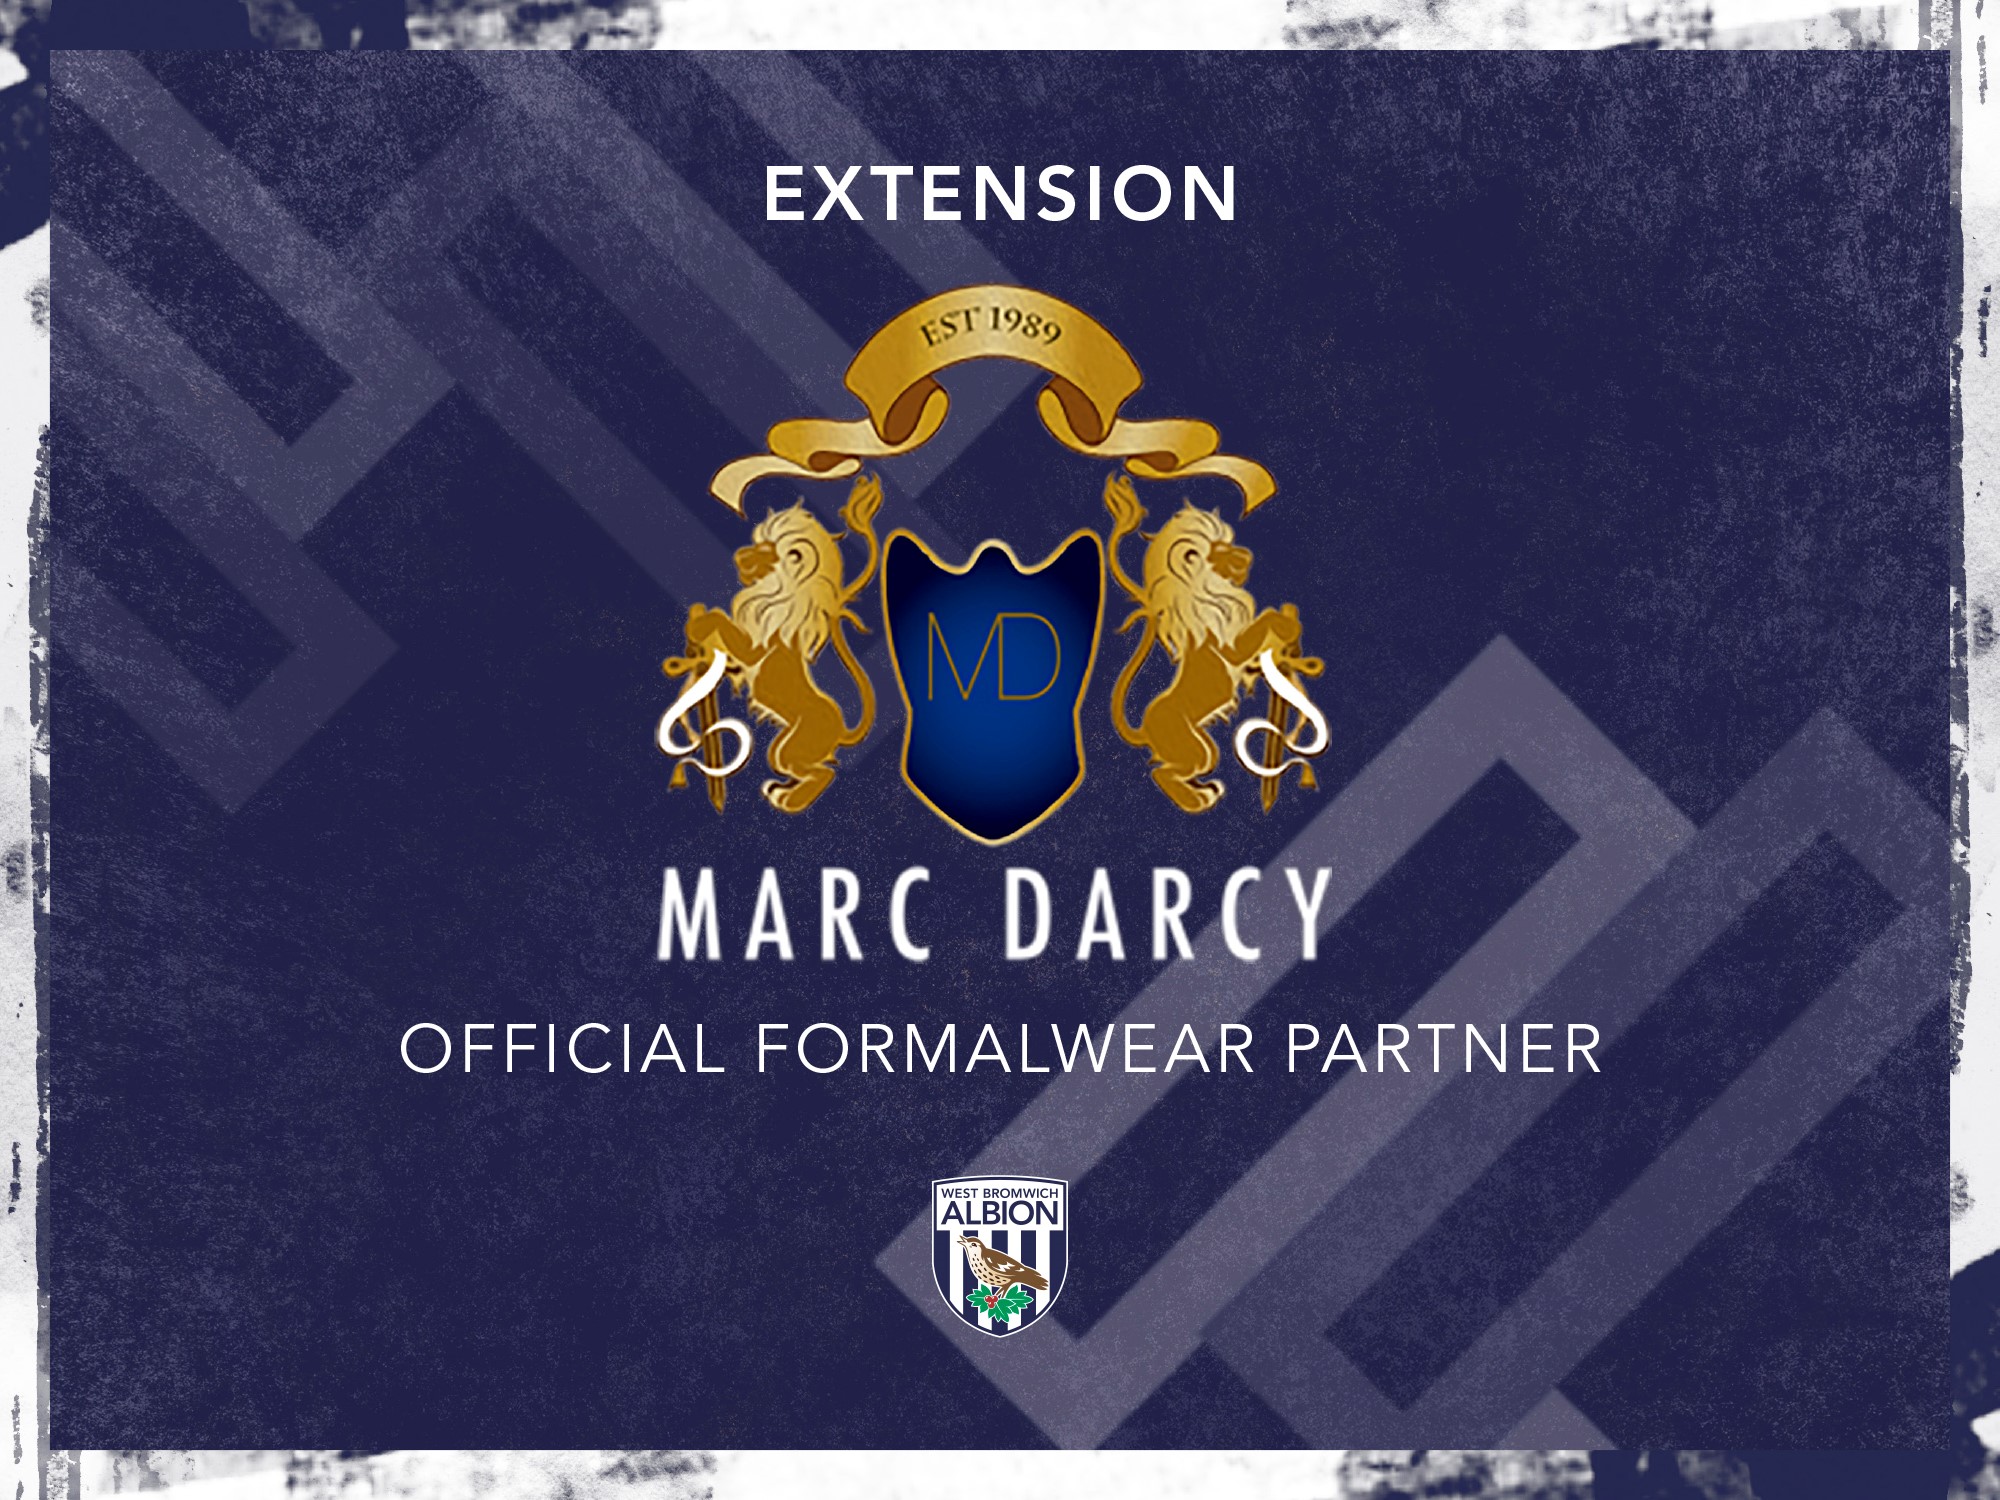 Albion have extended their partnership with Marc Darcy for a further two seasons